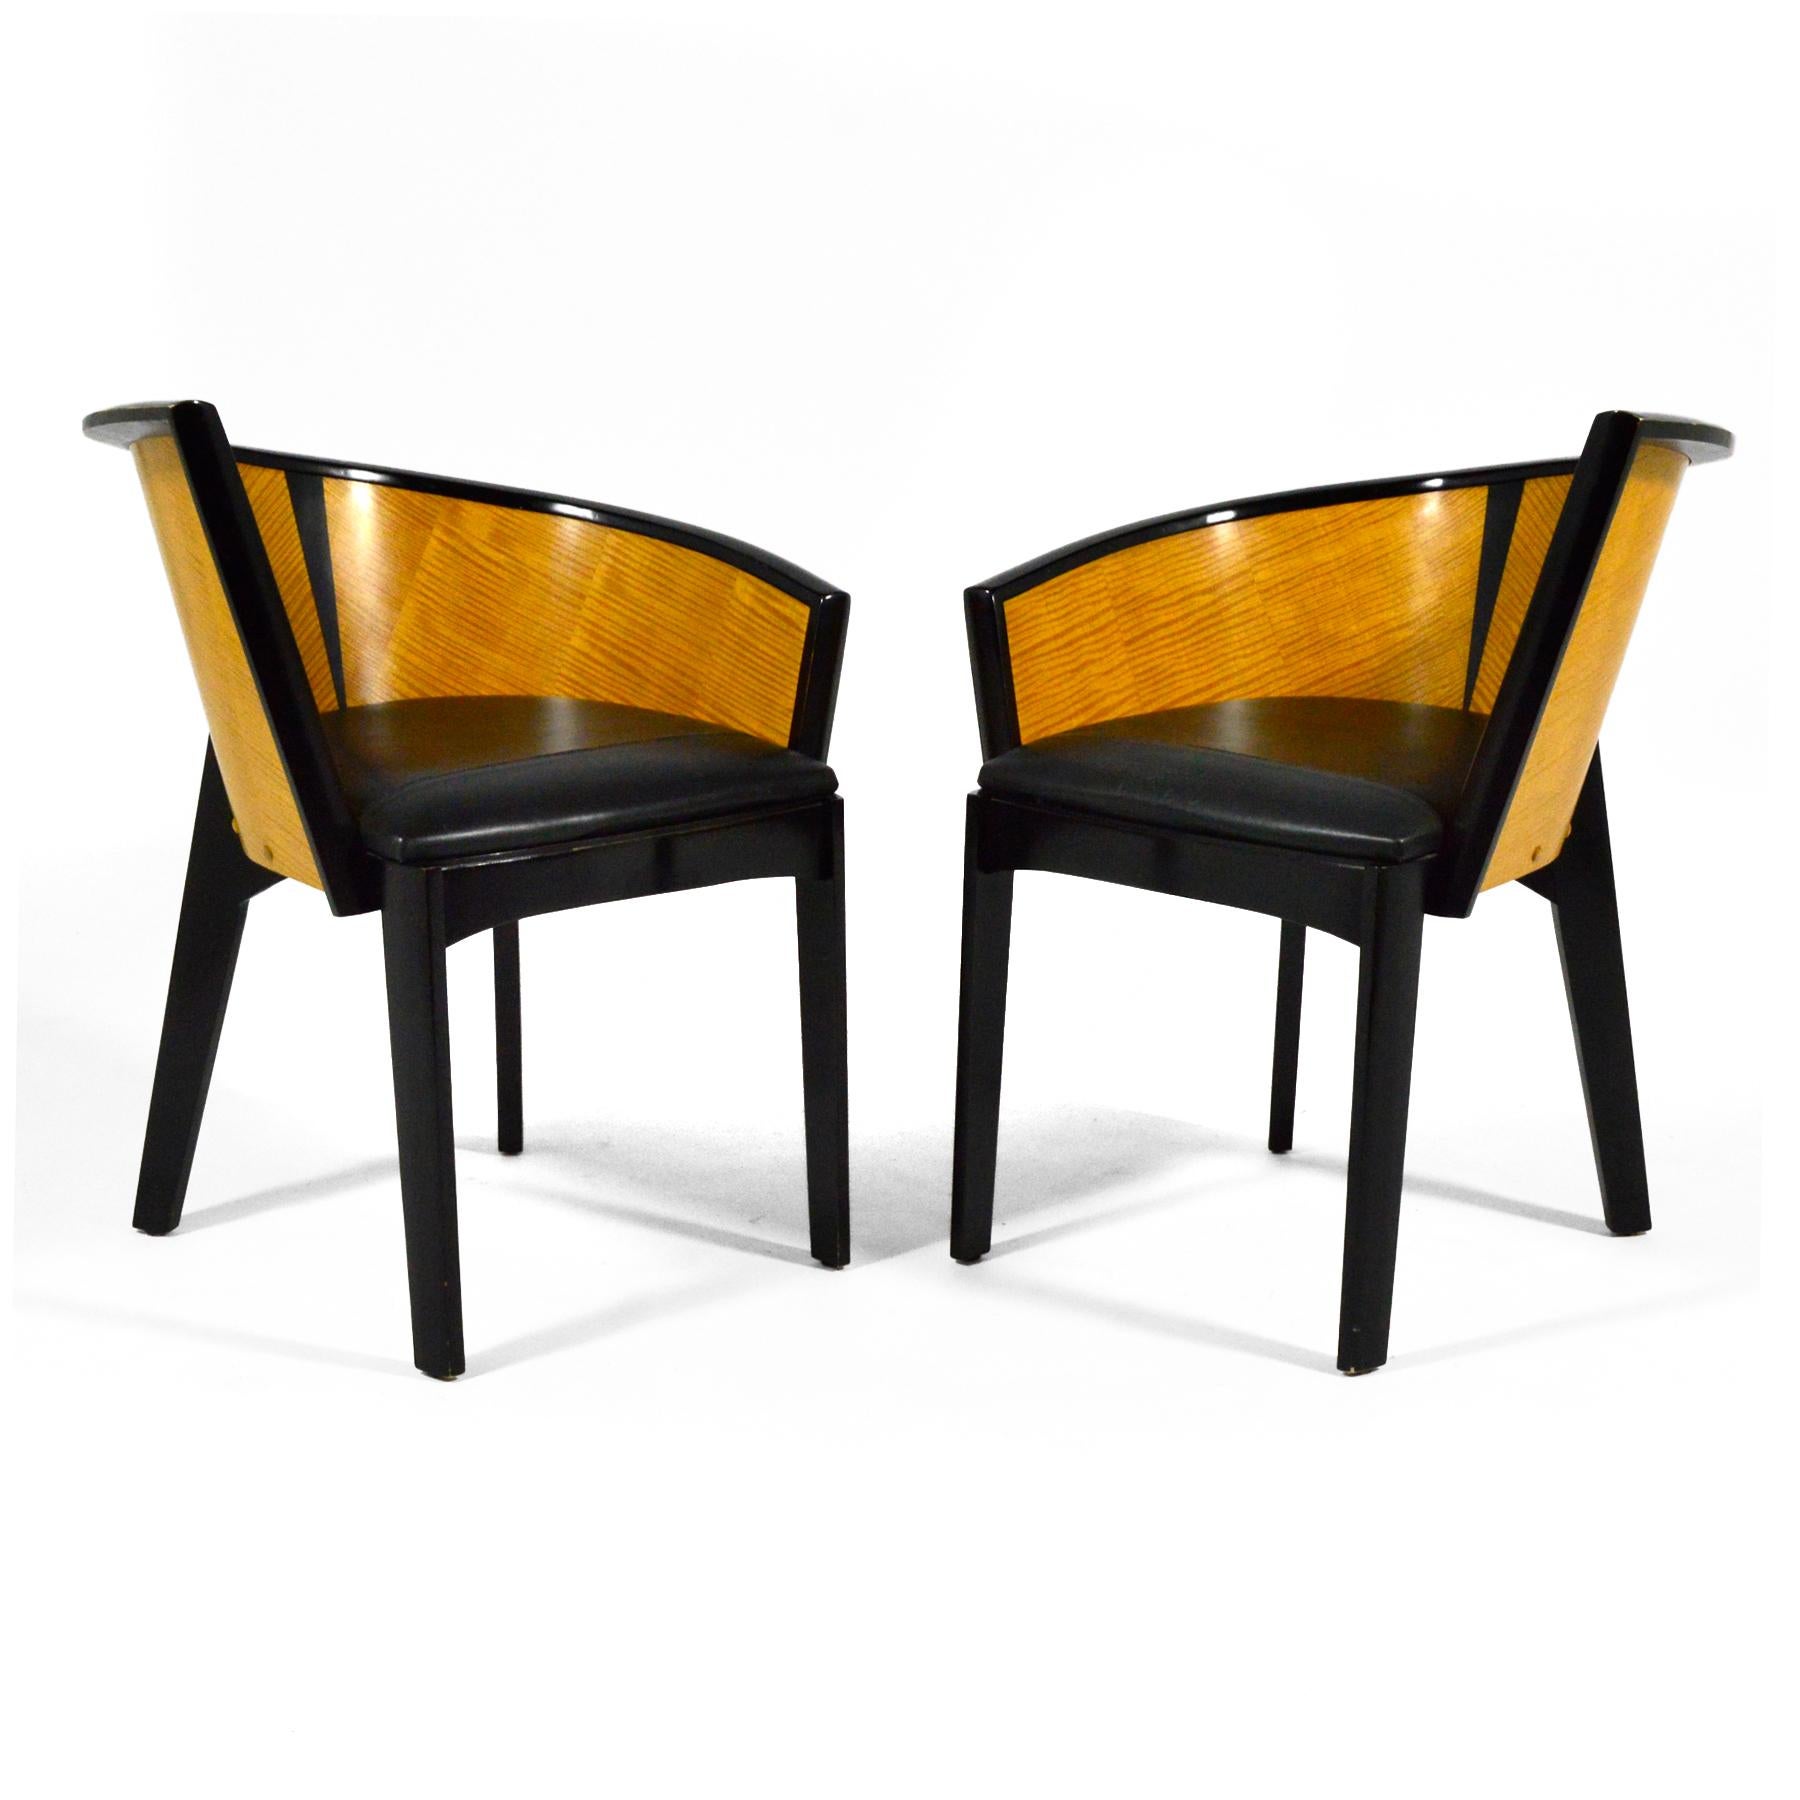 A combination of a side chair and a barrel chair, the Sinistra chair designed by Paul Haigh for Bernhardt in 1987 is a striking asymmetrical design. Rich wood veneers, black lacquered, and leather combine in this compelling Postmodern design that